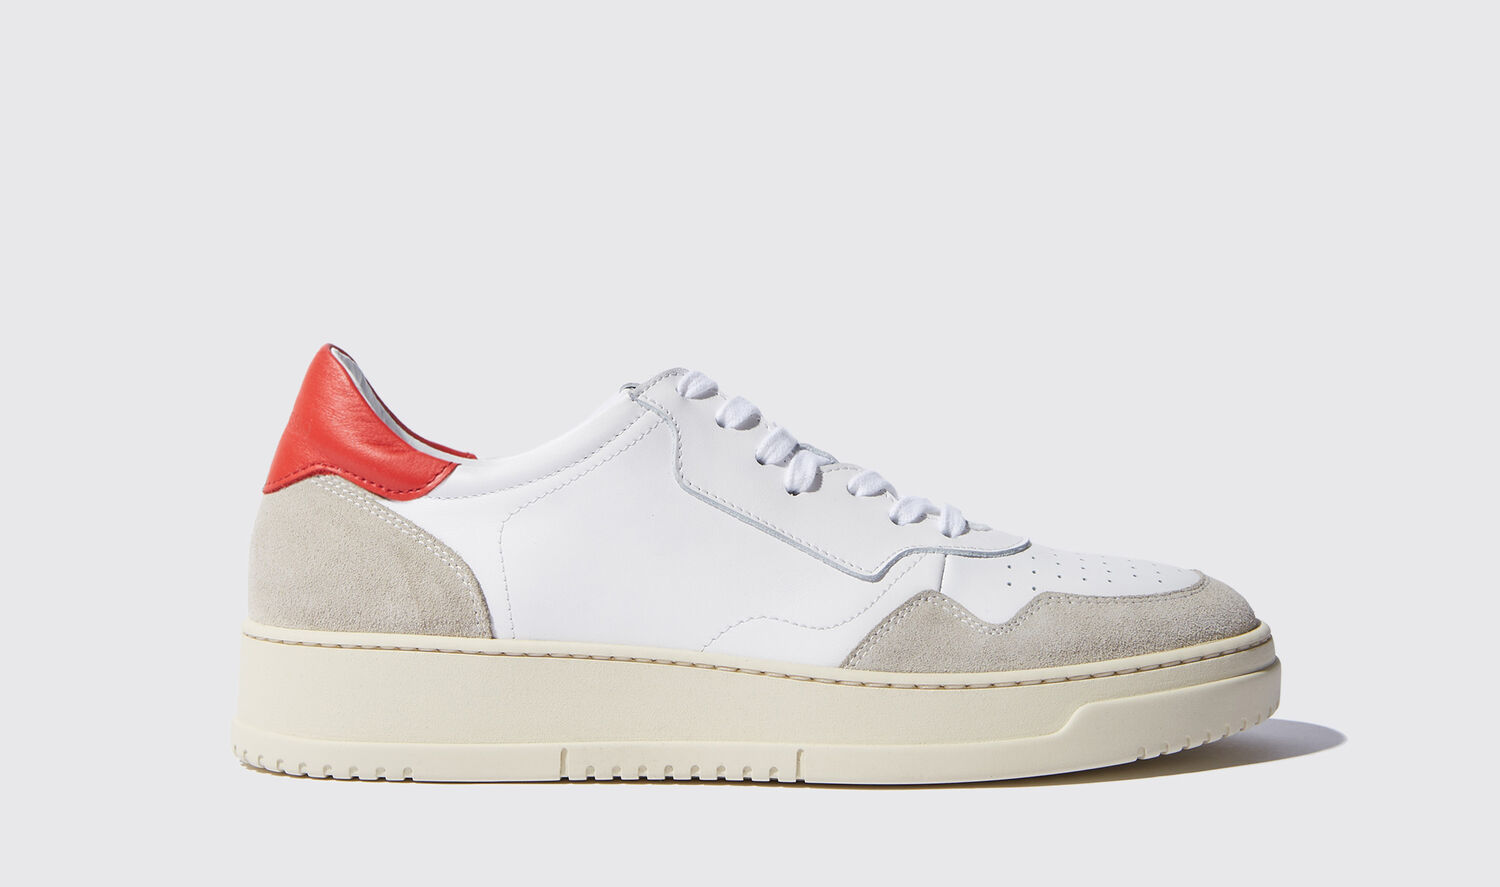 Scarosso Sneakers Alex Red Edit Calf Leather In White/red - Calf